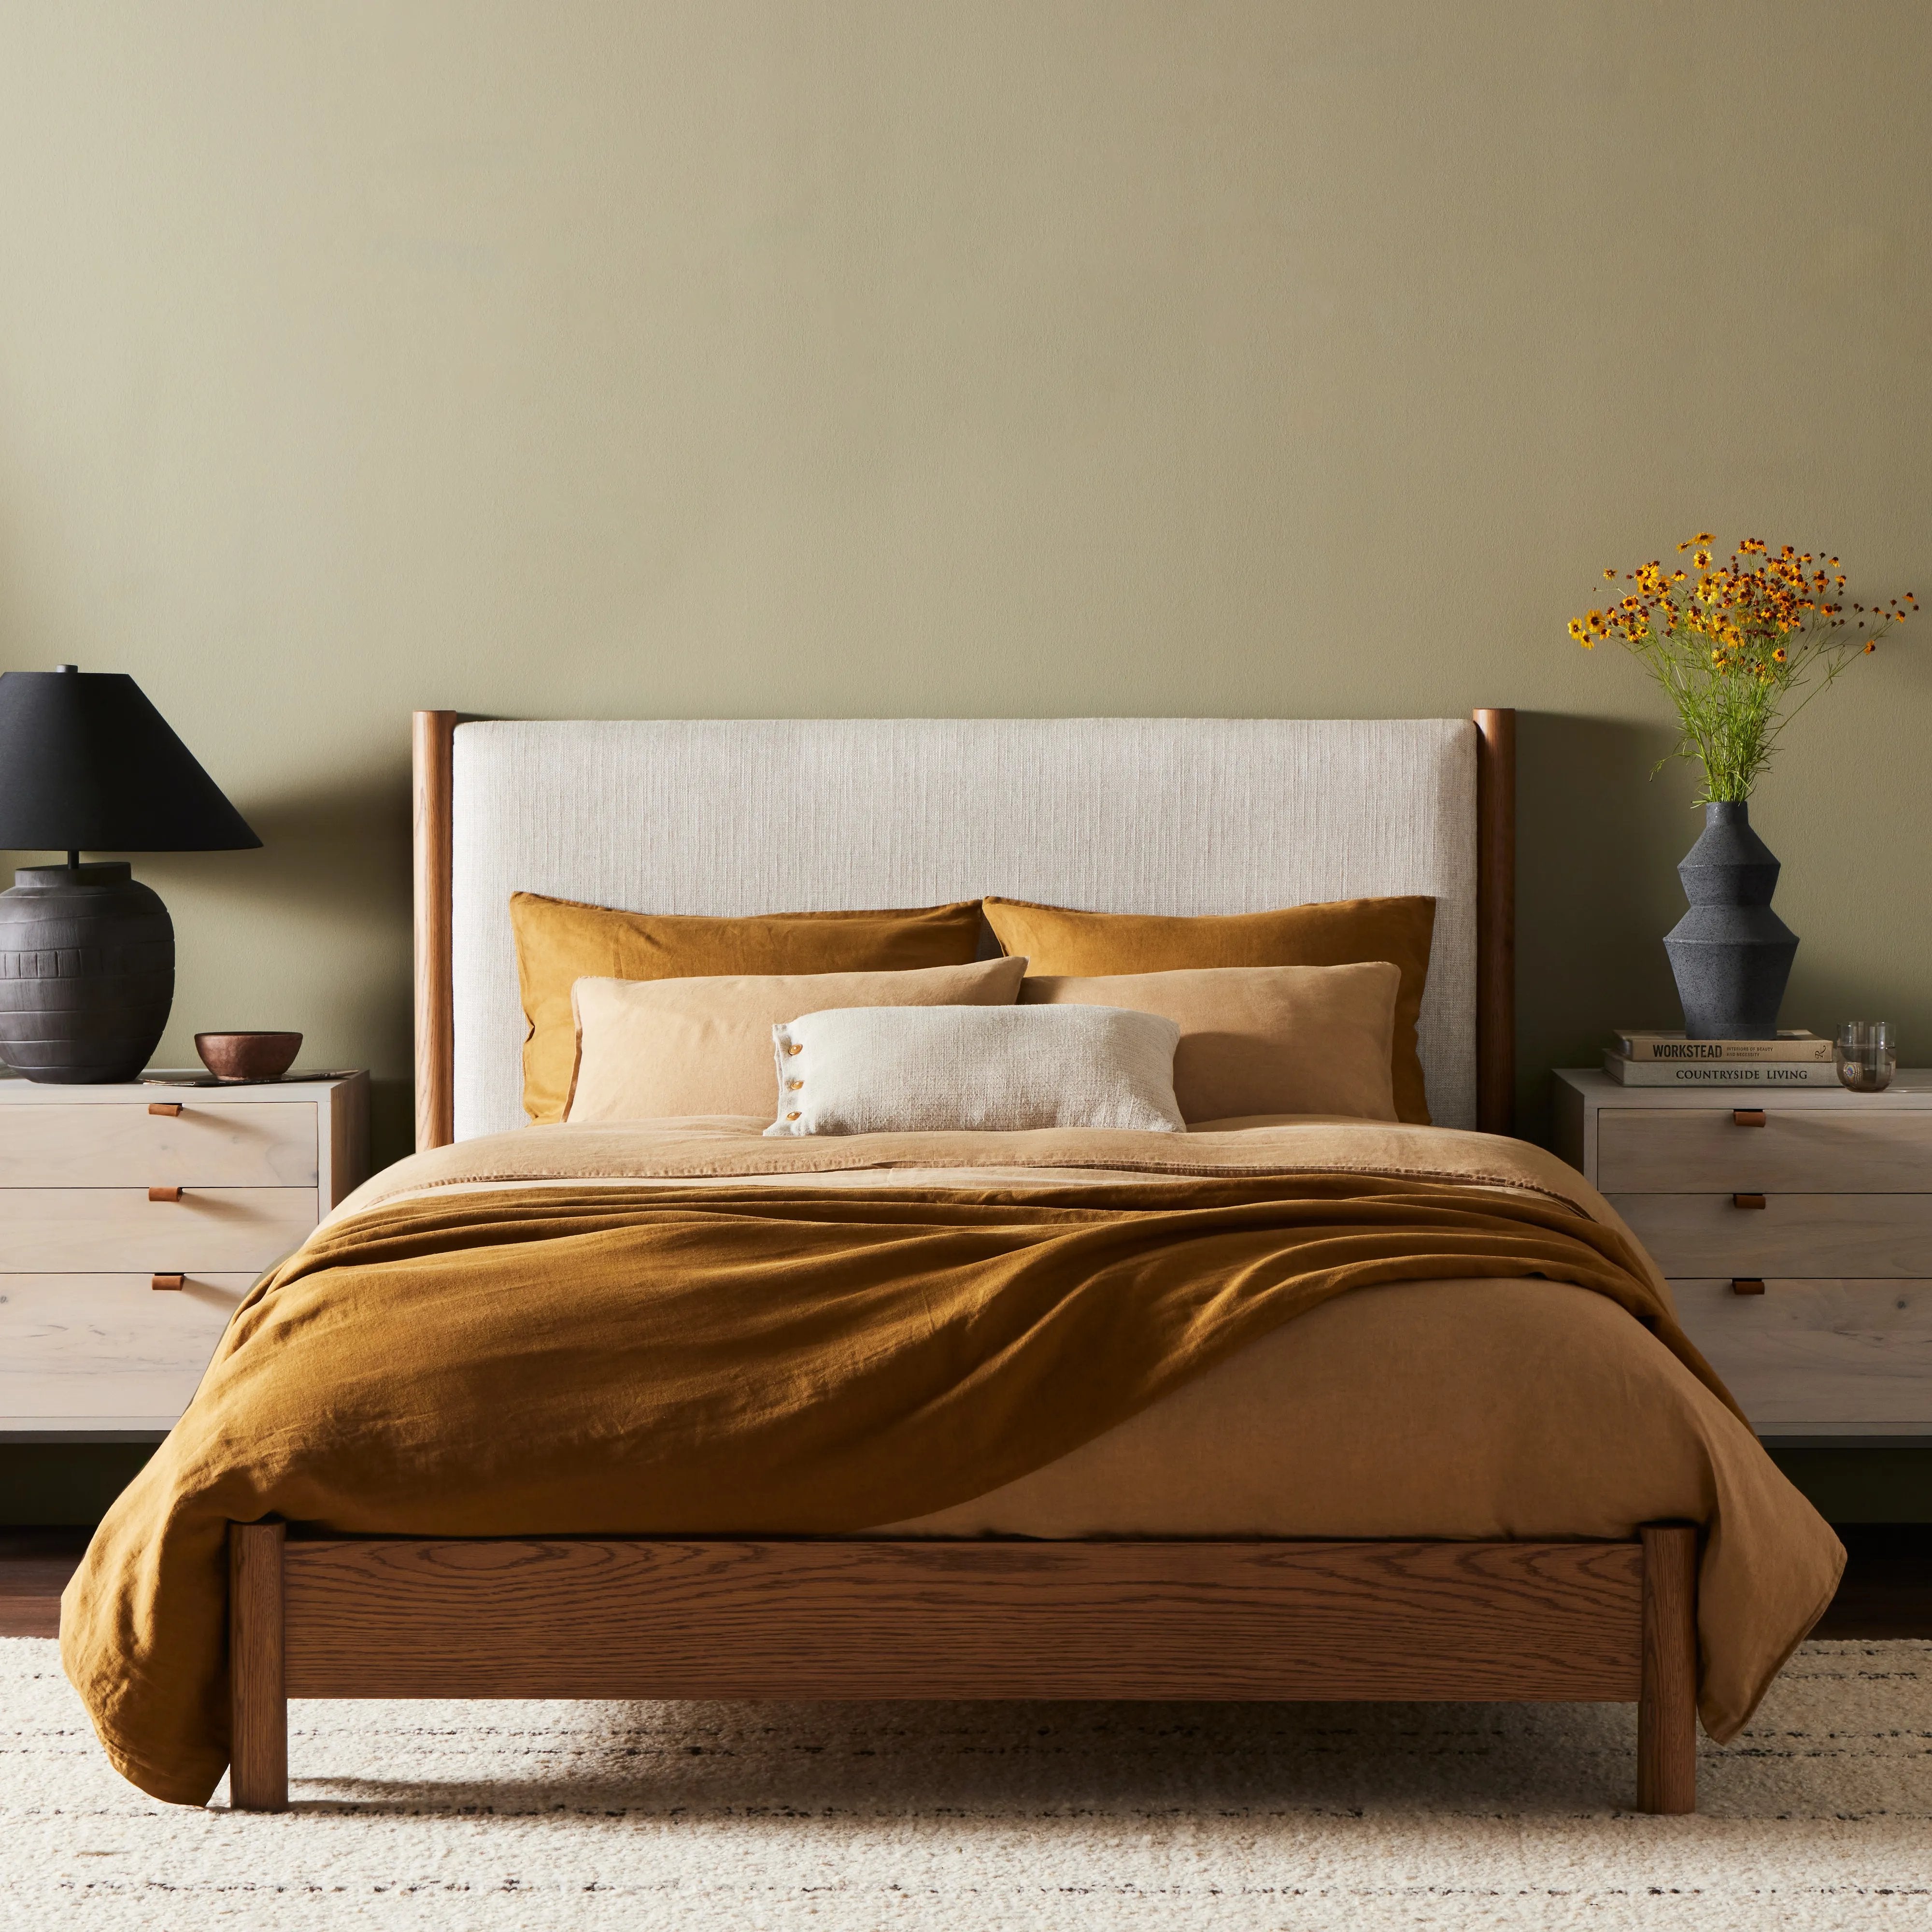 Rounded, chunky dowel legs in an amber oak finish frame the neutral, linen-like upholstered headboard of this bed frame.Collection: Bolto Amethyst Home provides interior design, new home construction design consulting, vintage area rugs, and lighting in the Des Moines metro area.